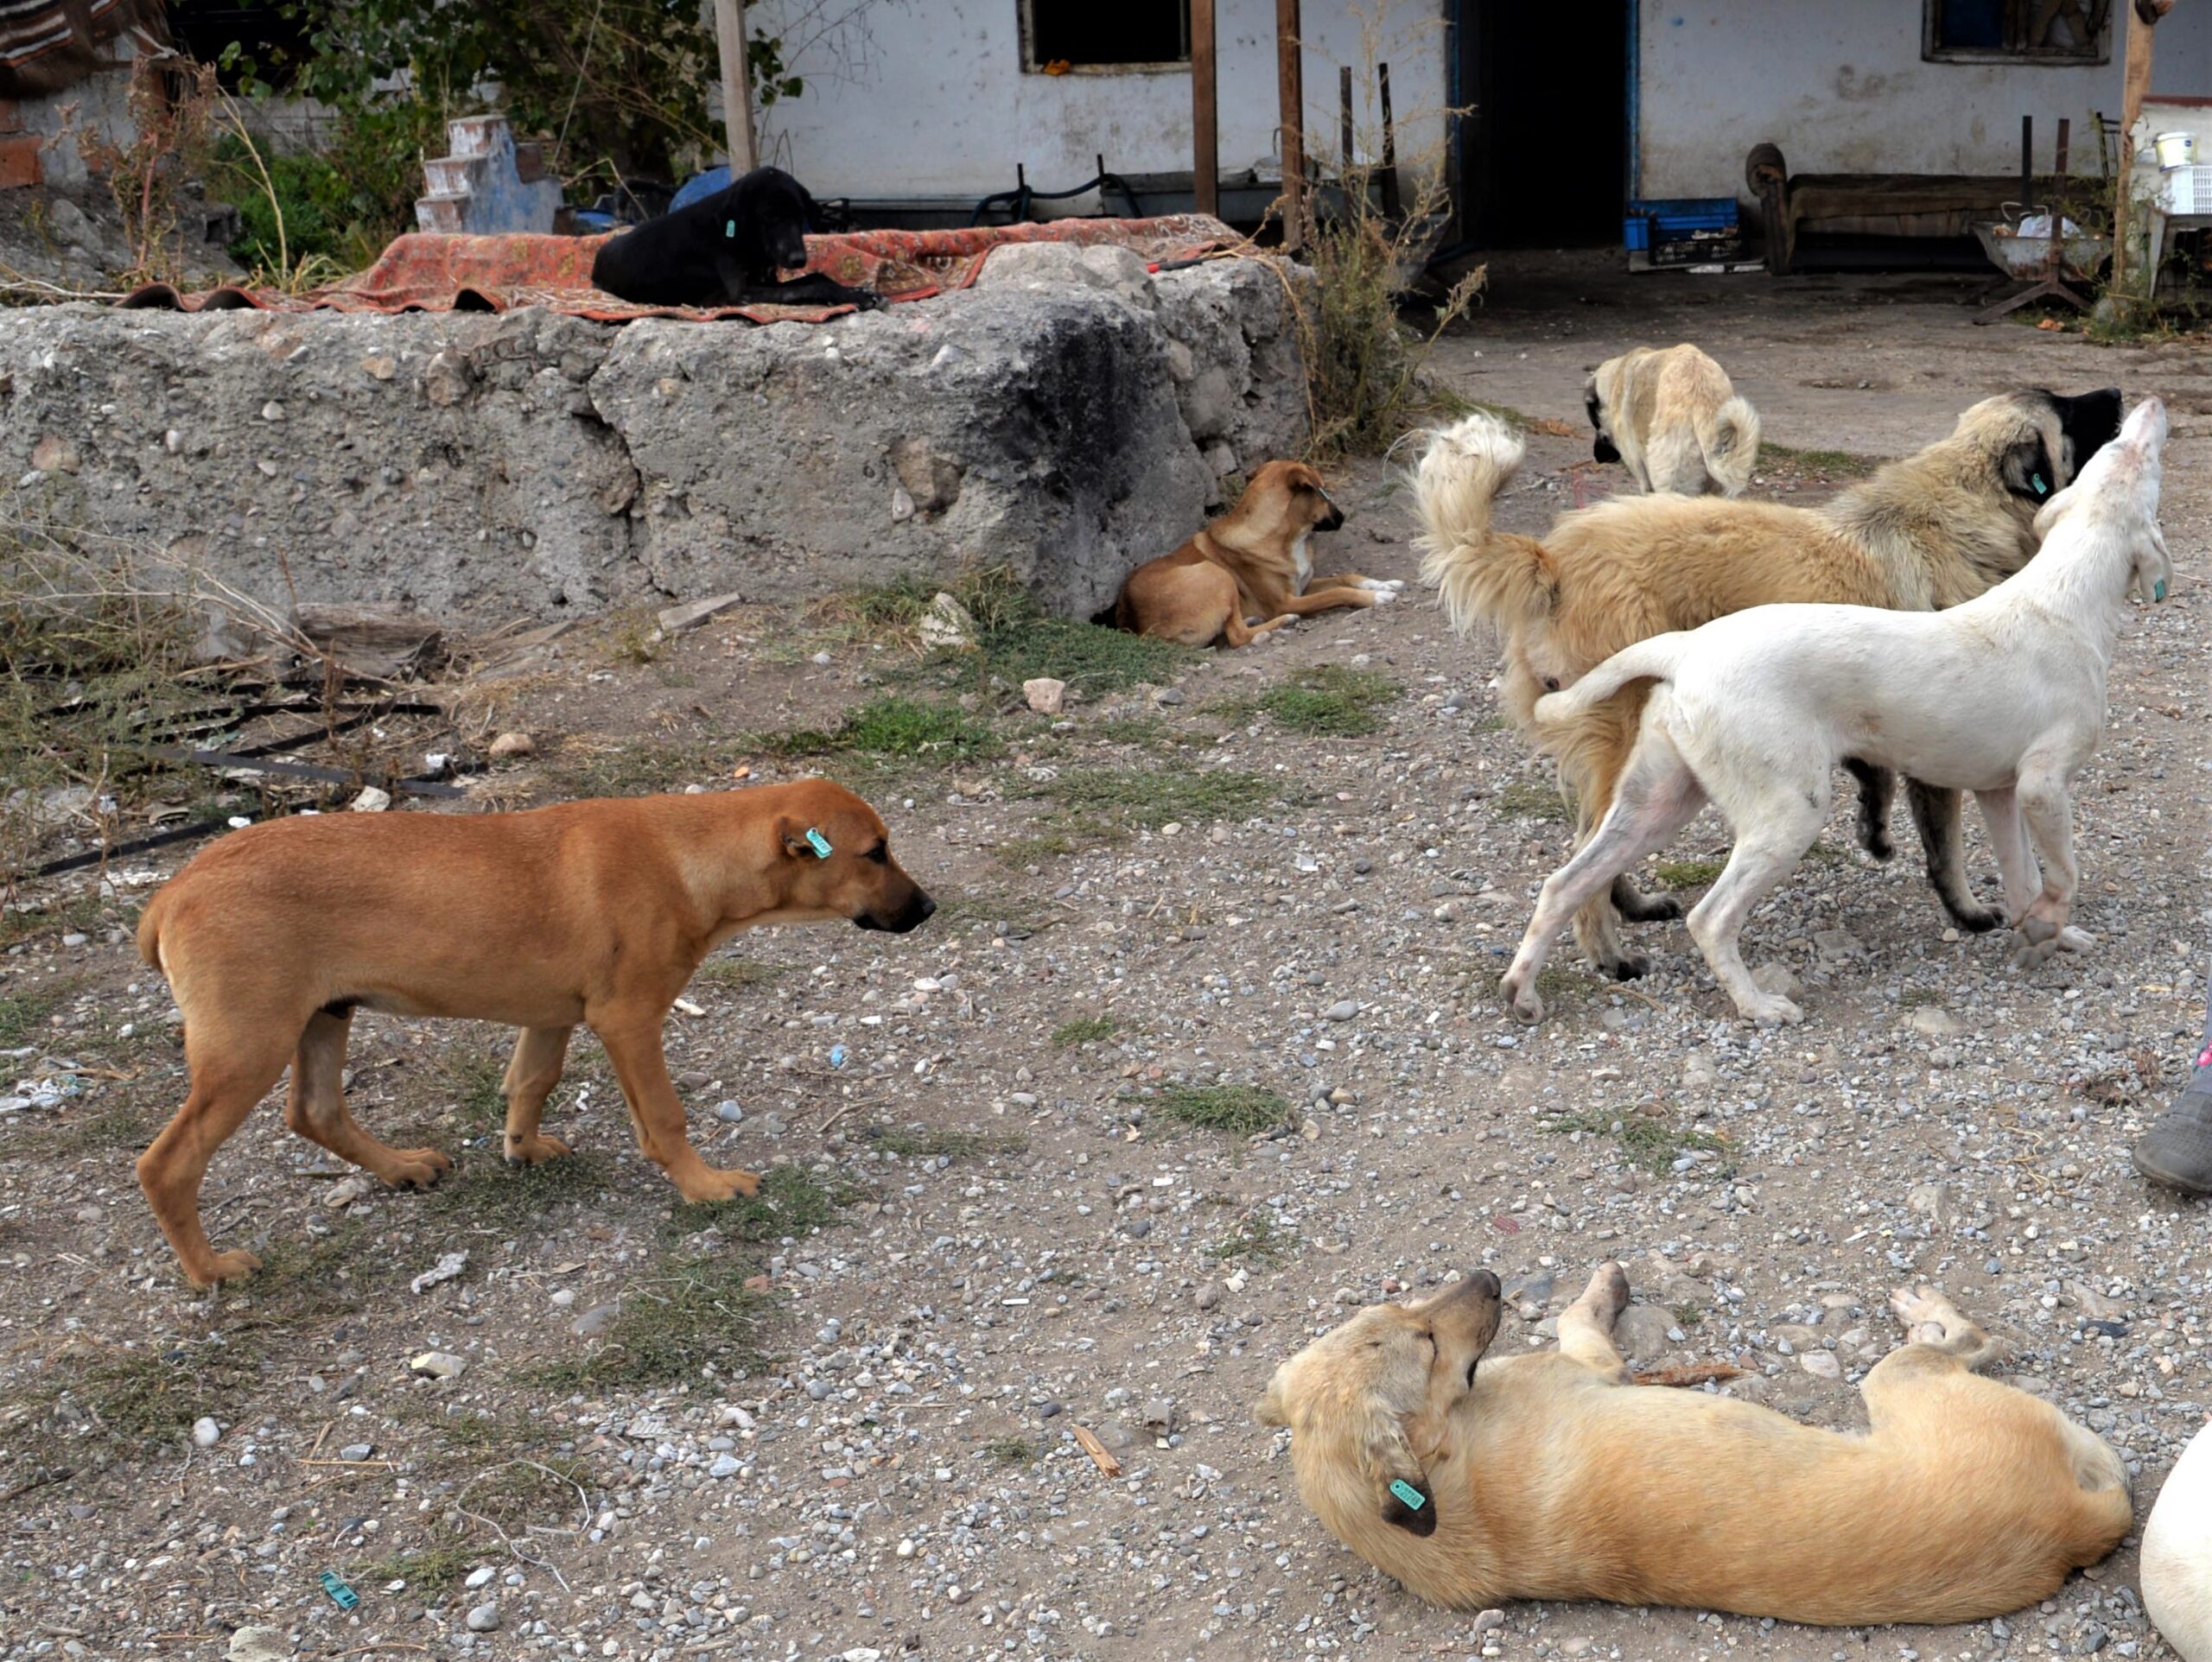 Türkiye prioritizes action on stray dog crisis, calls for improved shelter conditions